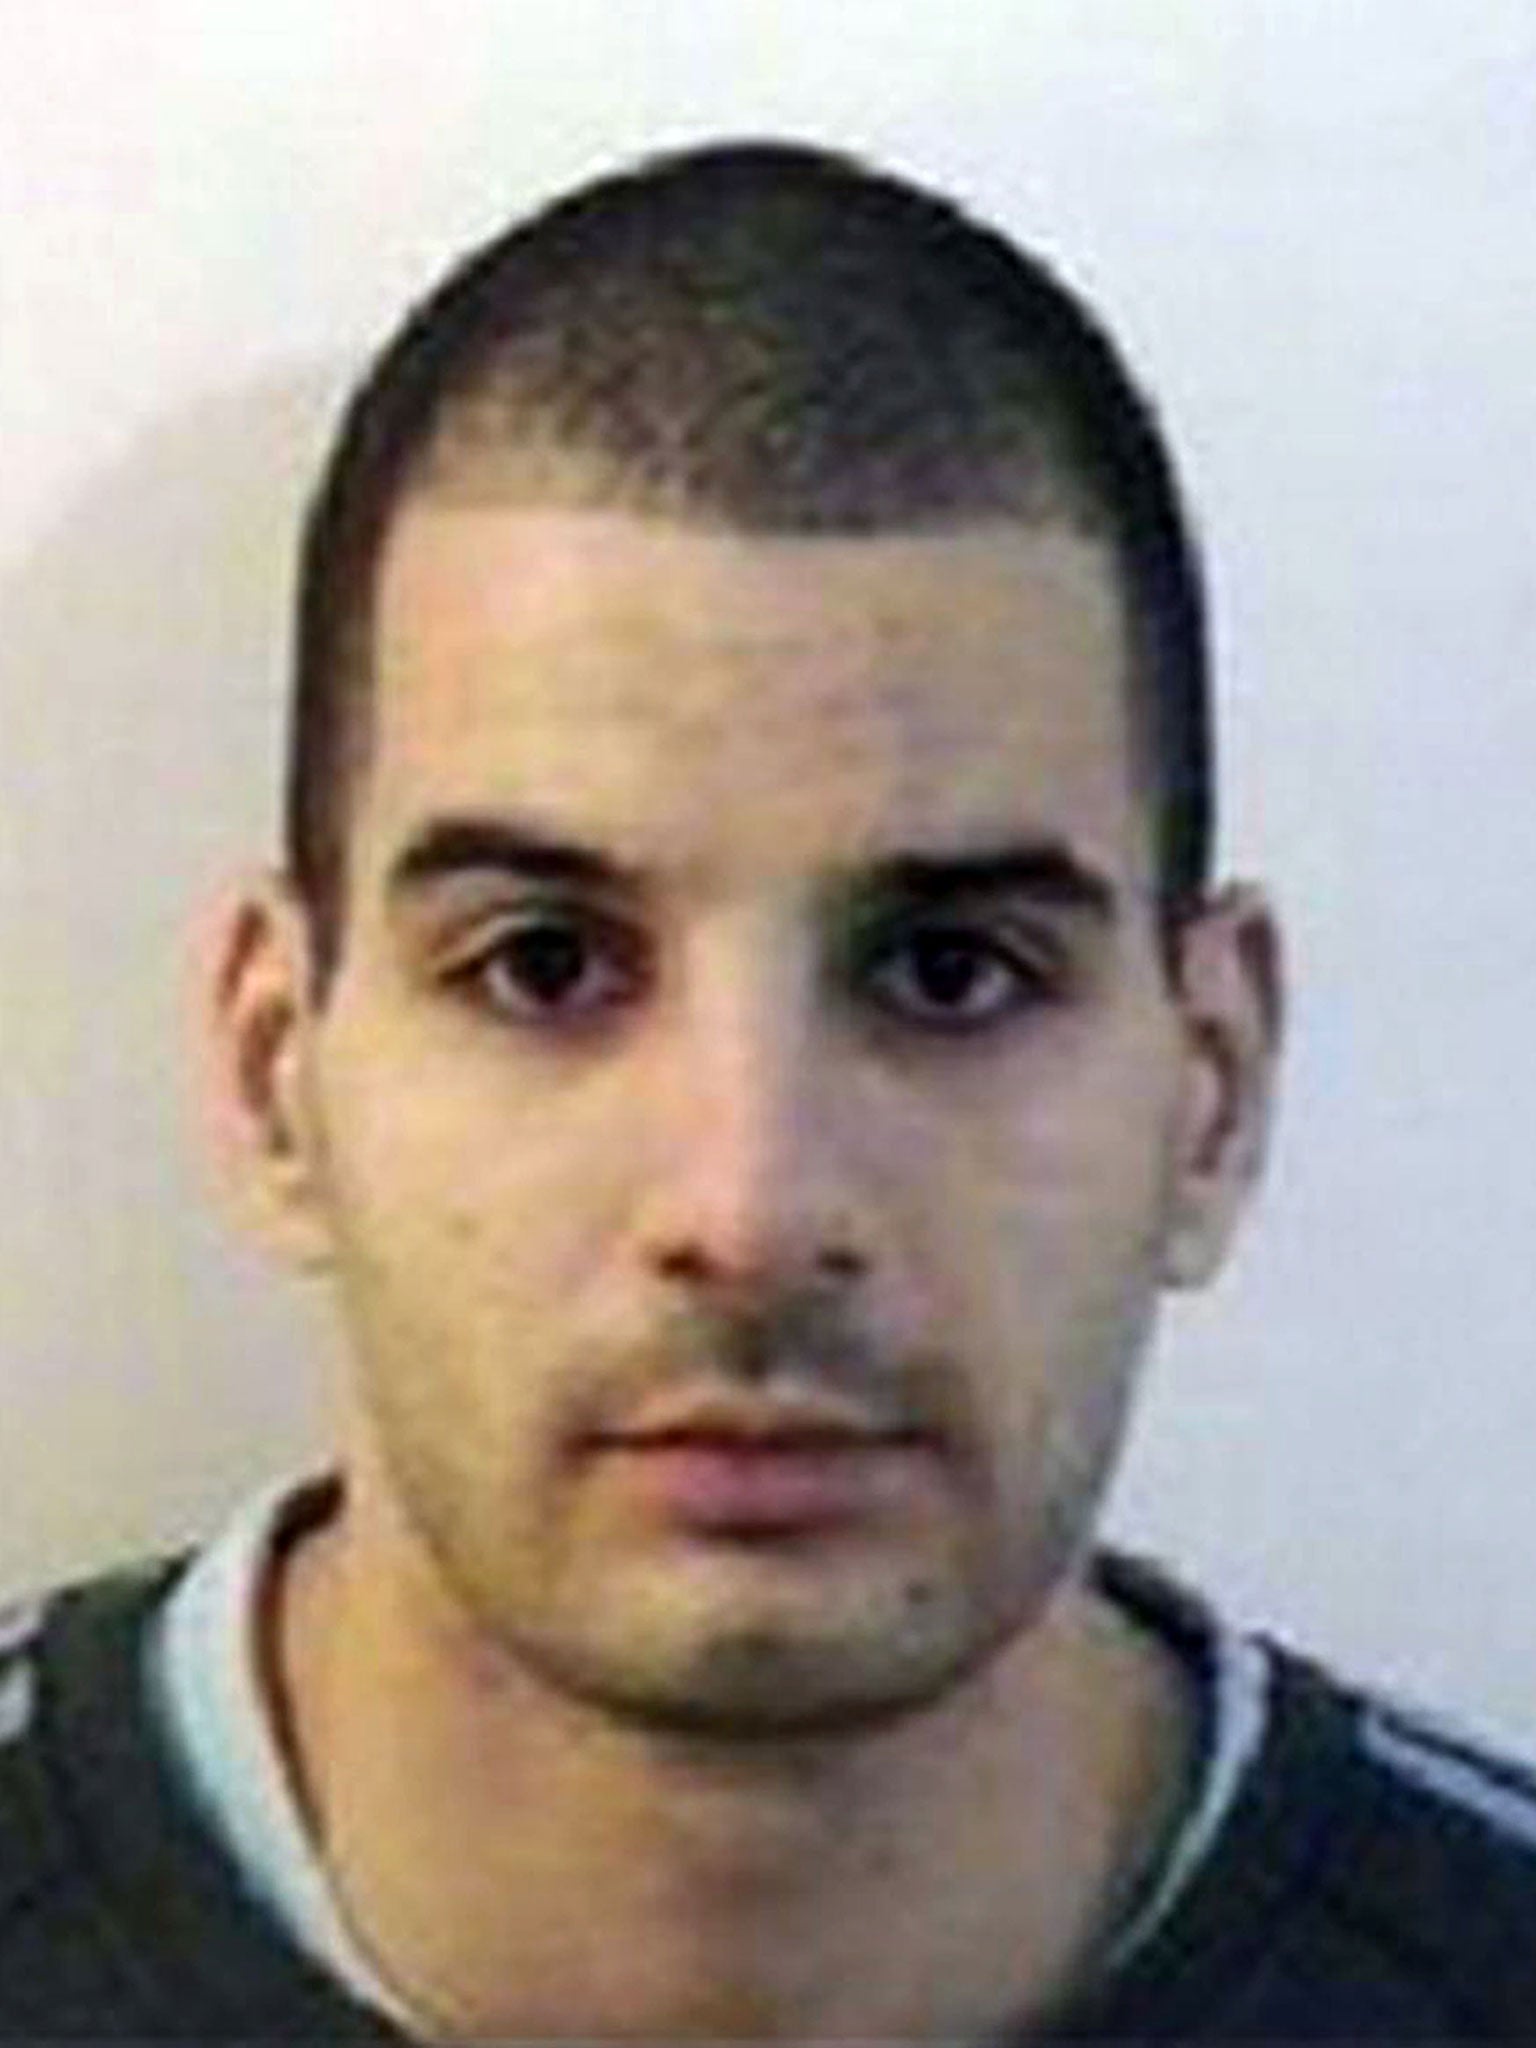 Haroon Ahmed, convicted in 2008 of robbing a garage armed with a knife, walked out the main entrance of Dovegate prison in Staffordshire